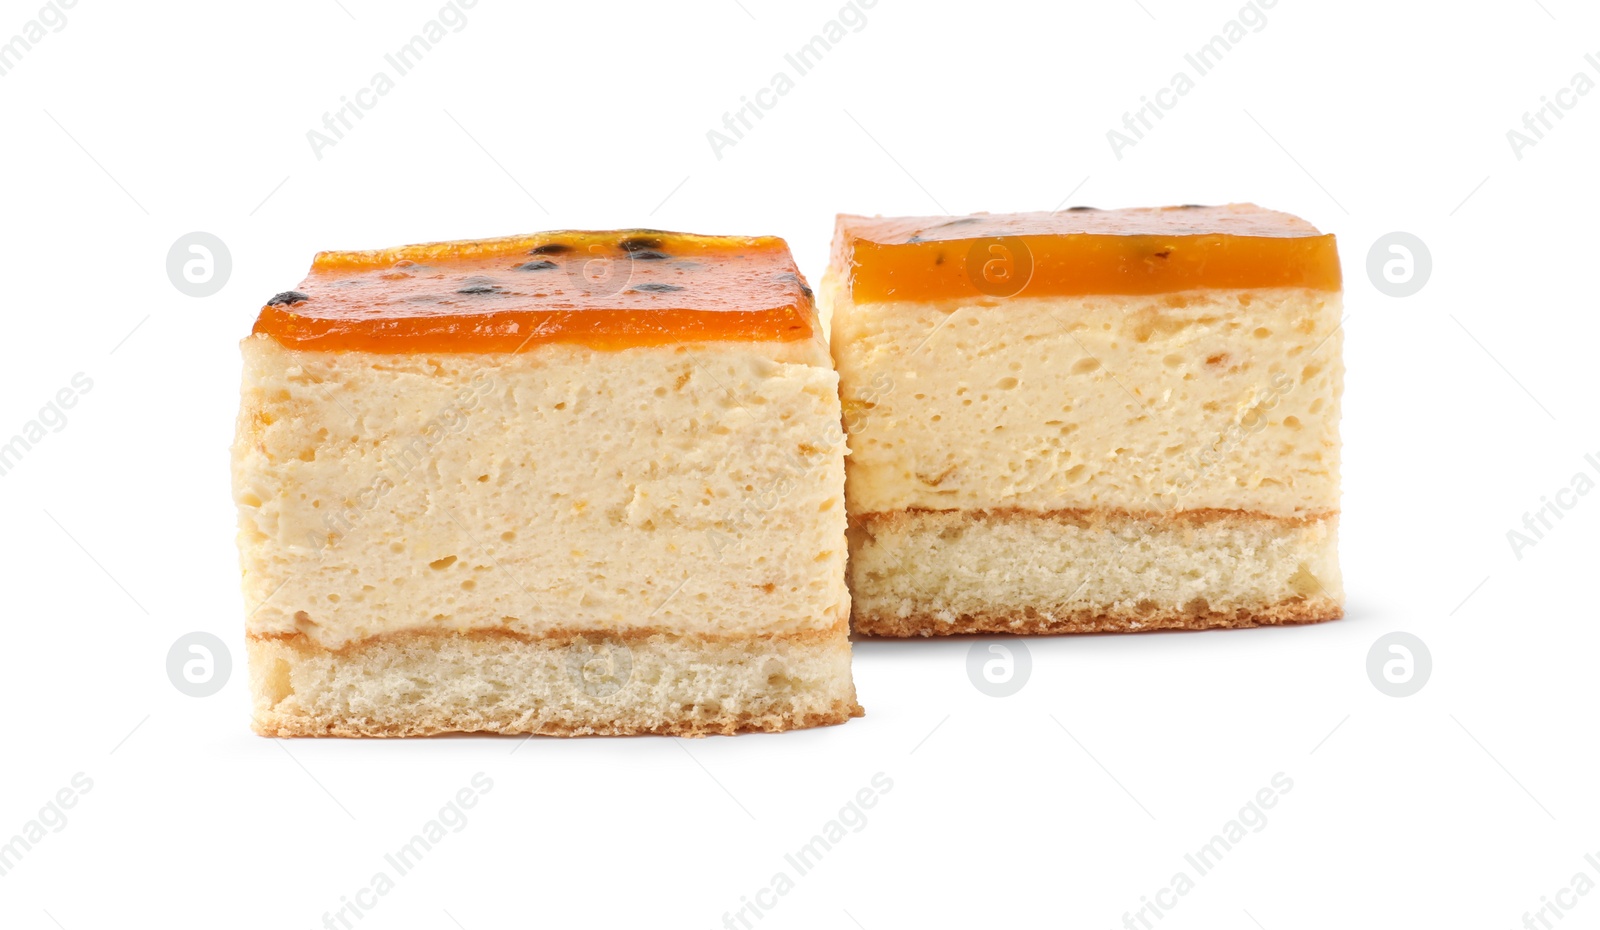 Photo of Pieces of cheesecake with jelly on white background